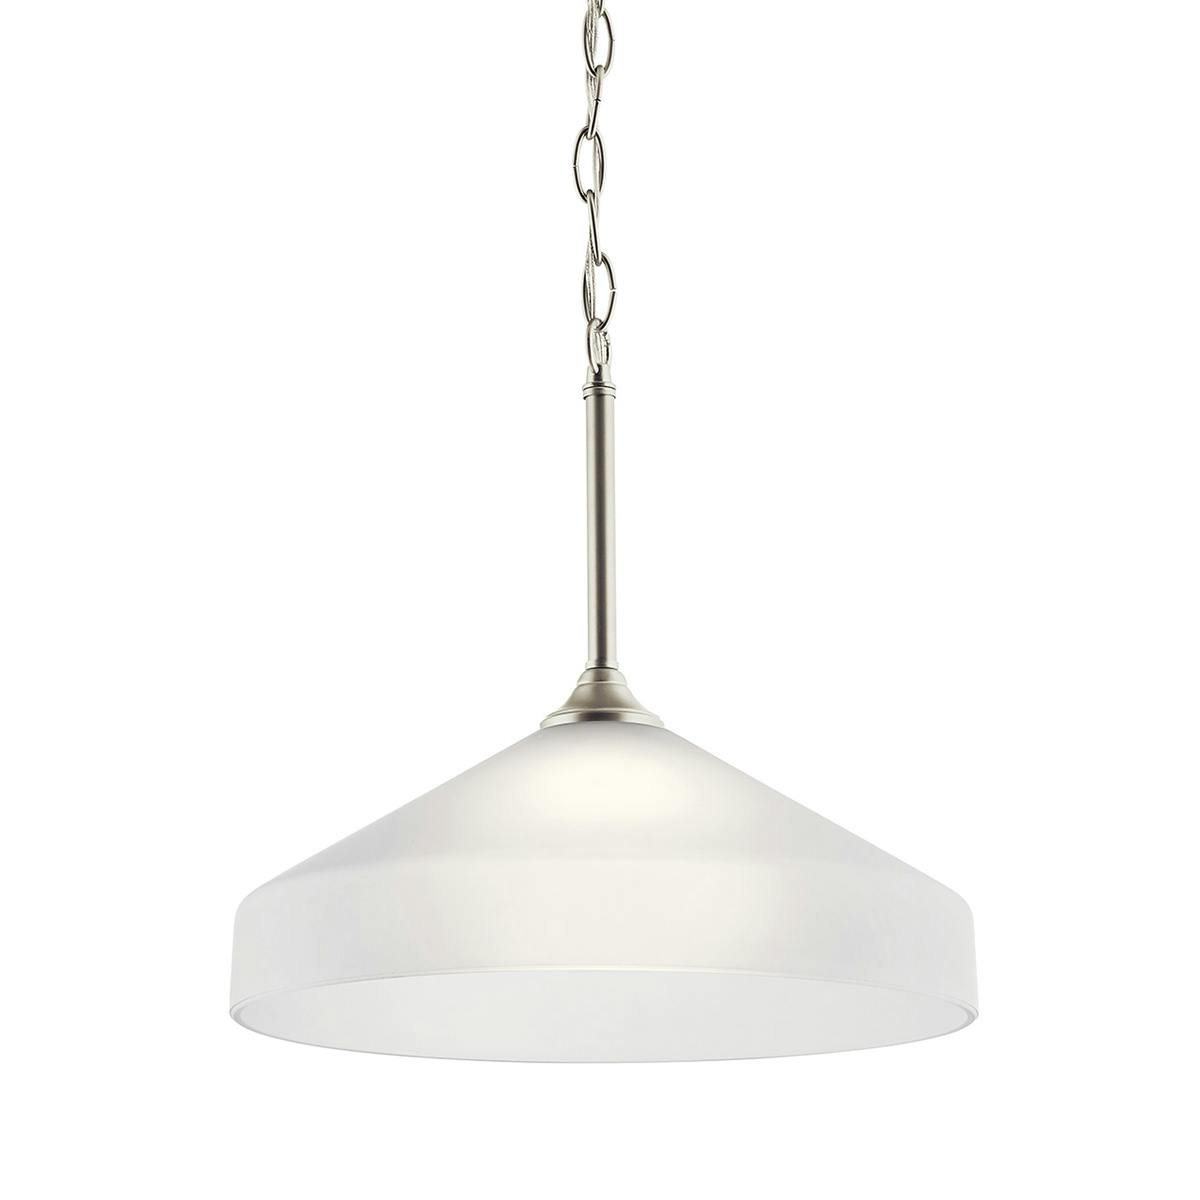 Ansonia Pendant Glass in Nickel without the canopy on a white background